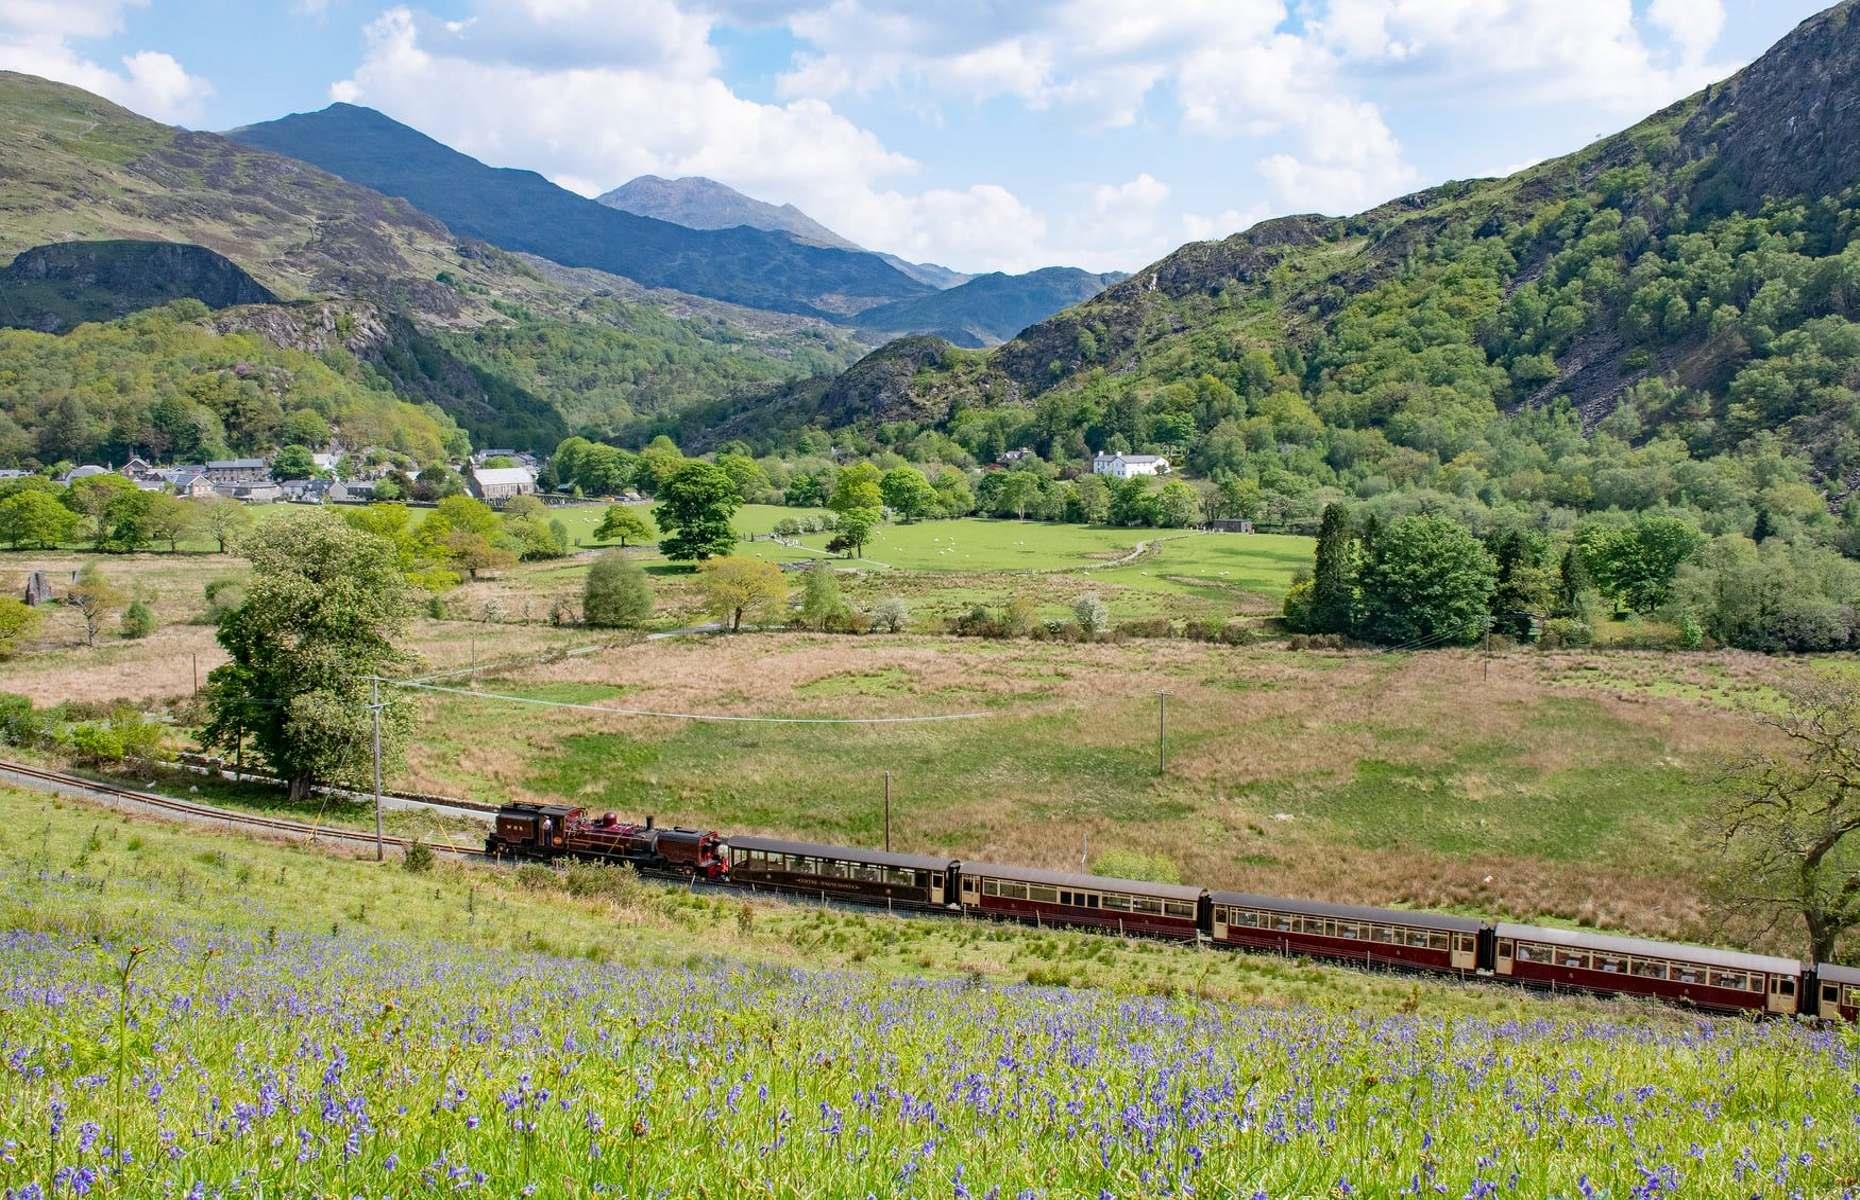 <p>The oldest independent railway company in the world, the <a href="https://www.festrail.co.uk/">Ffestiniog Railway</a> has been slicing through the Snowdonia National Park since 1832. The historic train takes passengers 13.5 miles (21.7km) from the harbour in Porthmadog to the slate quarrying town of Blaenau Ffestiniog, winding around the rocky mountains. Highlights from the journey include passing along mountain scenery, tranquil pastures and picture-perfect villages.</p>  <p><a href="http://www.loveexploring.com/galleries/97614/incredible-images-that-capture-the-history-of-train-travel?page=1"><strong>Check out these incredible images that capture the history of train travel</strong></a></p>